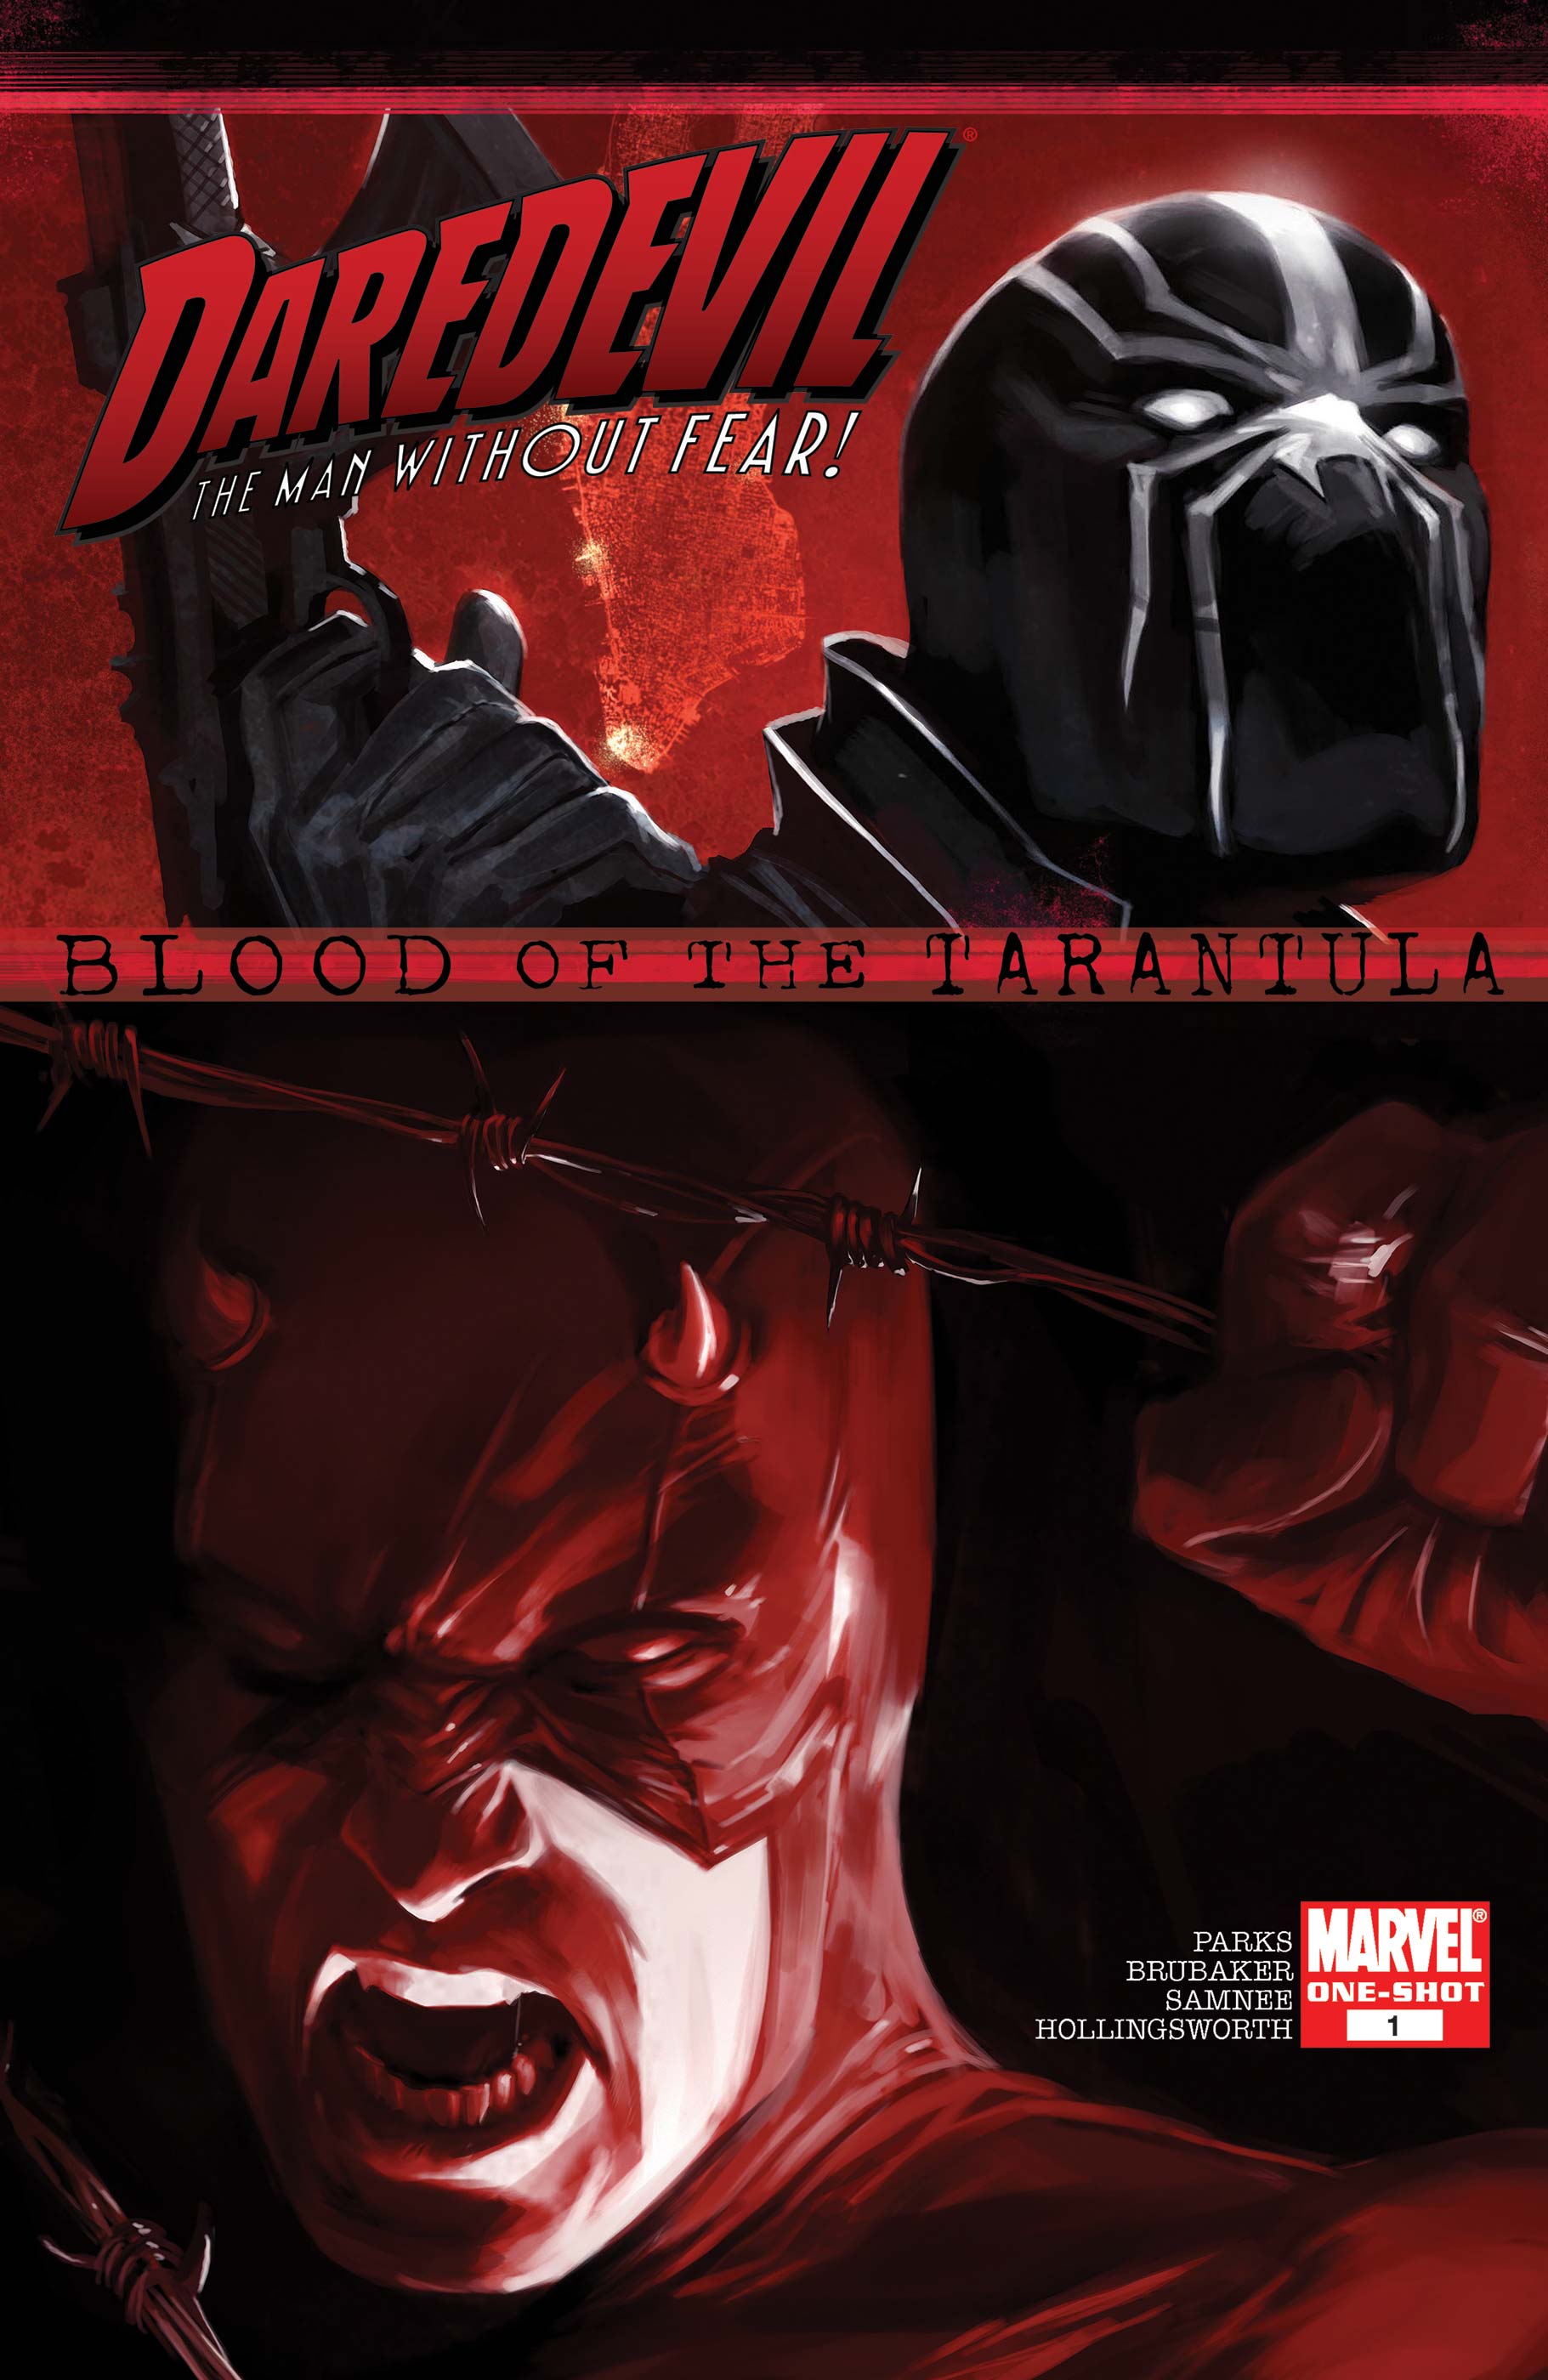 Daredevil: The Blood of the Tartantula (2008) One-Shot - Used